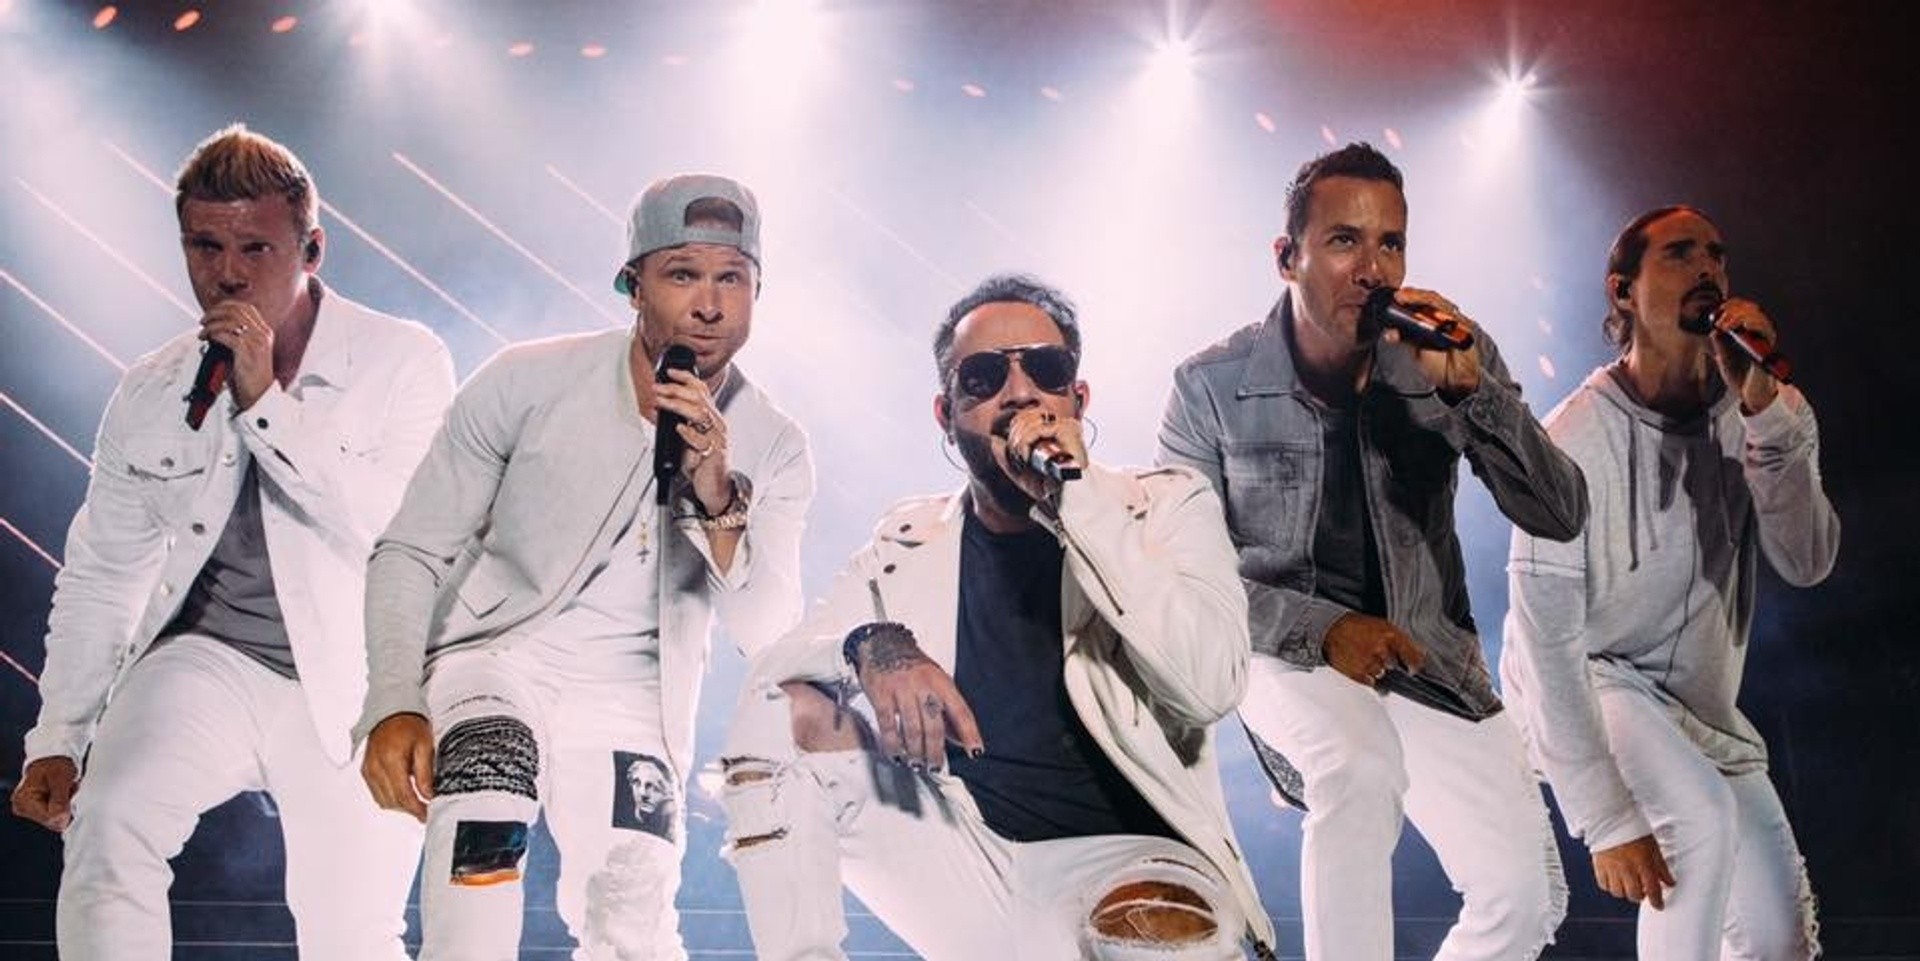 Backstreet Boys are back with new single ‘Don’t Go Breaking My Heart’ – watch